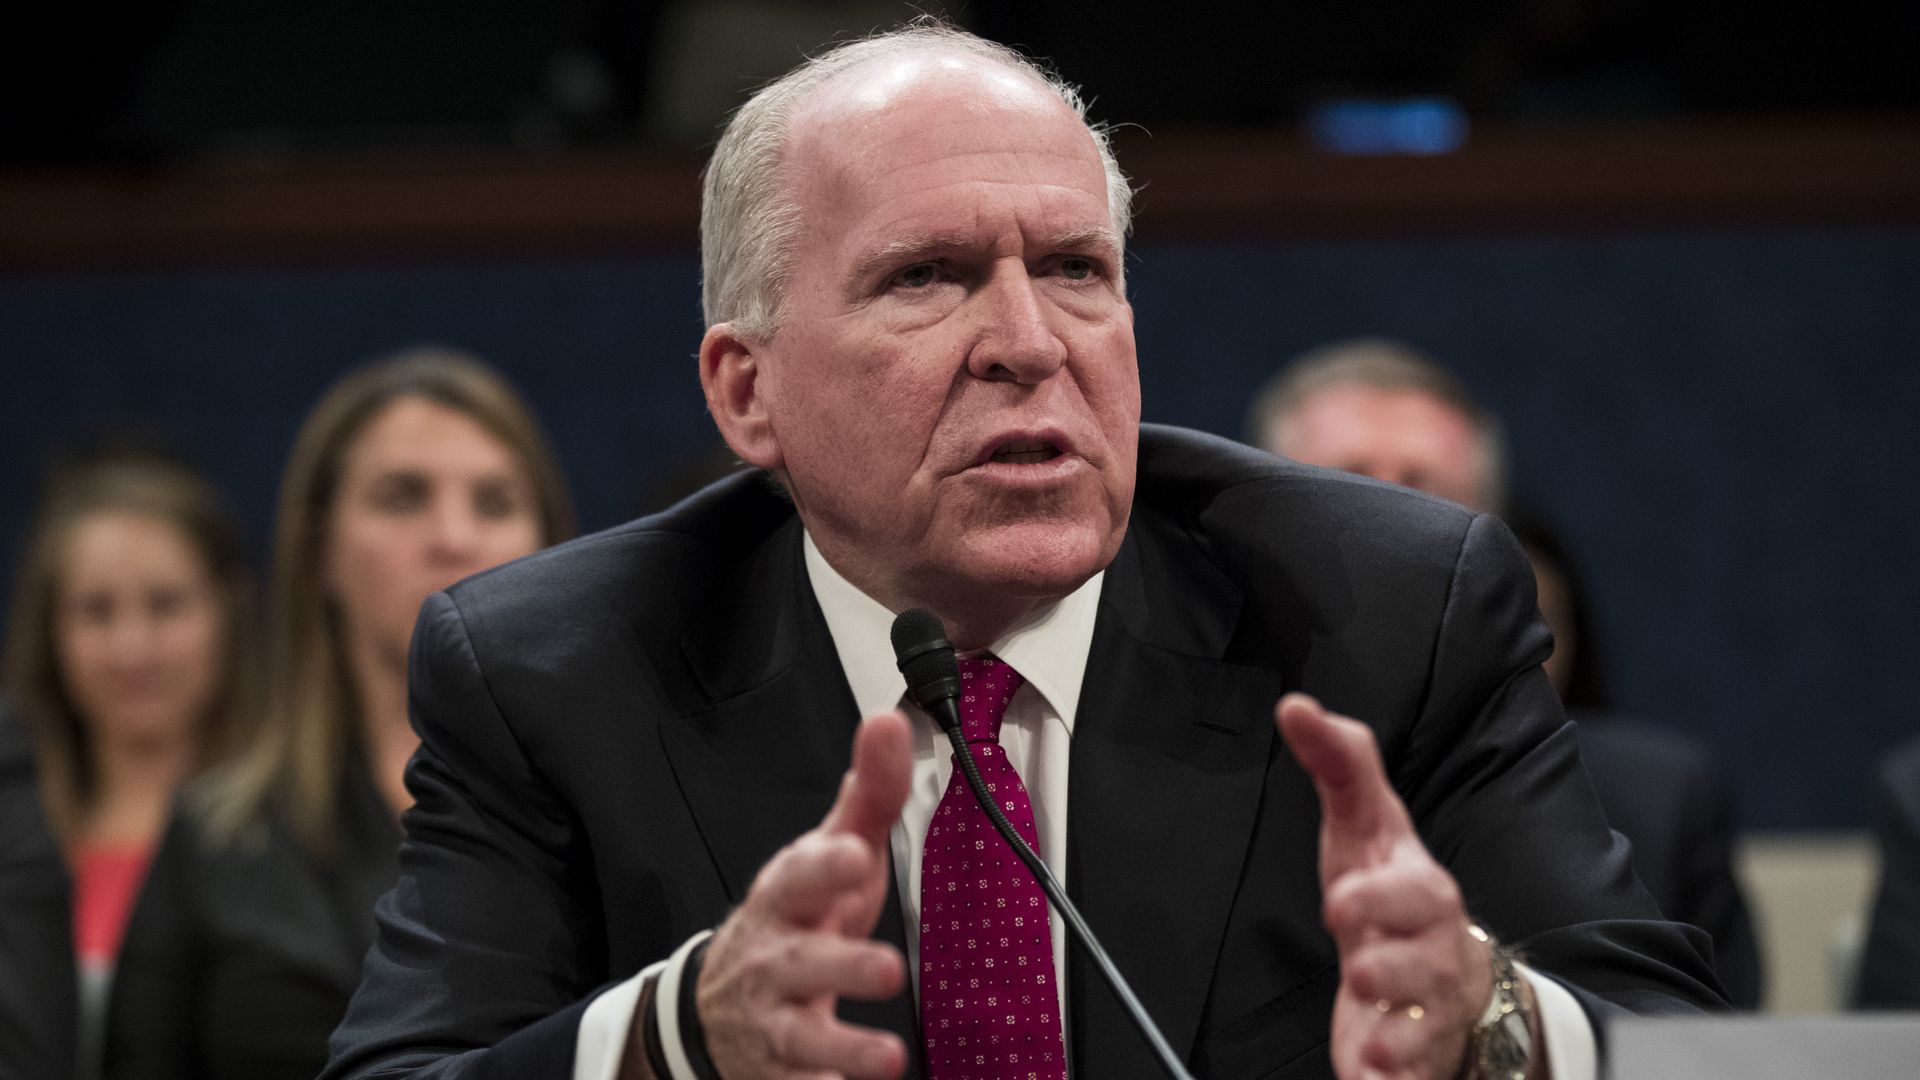 John Brennan says the Mueller probe has yet to address issues of criminal conspiracy involving Russia.